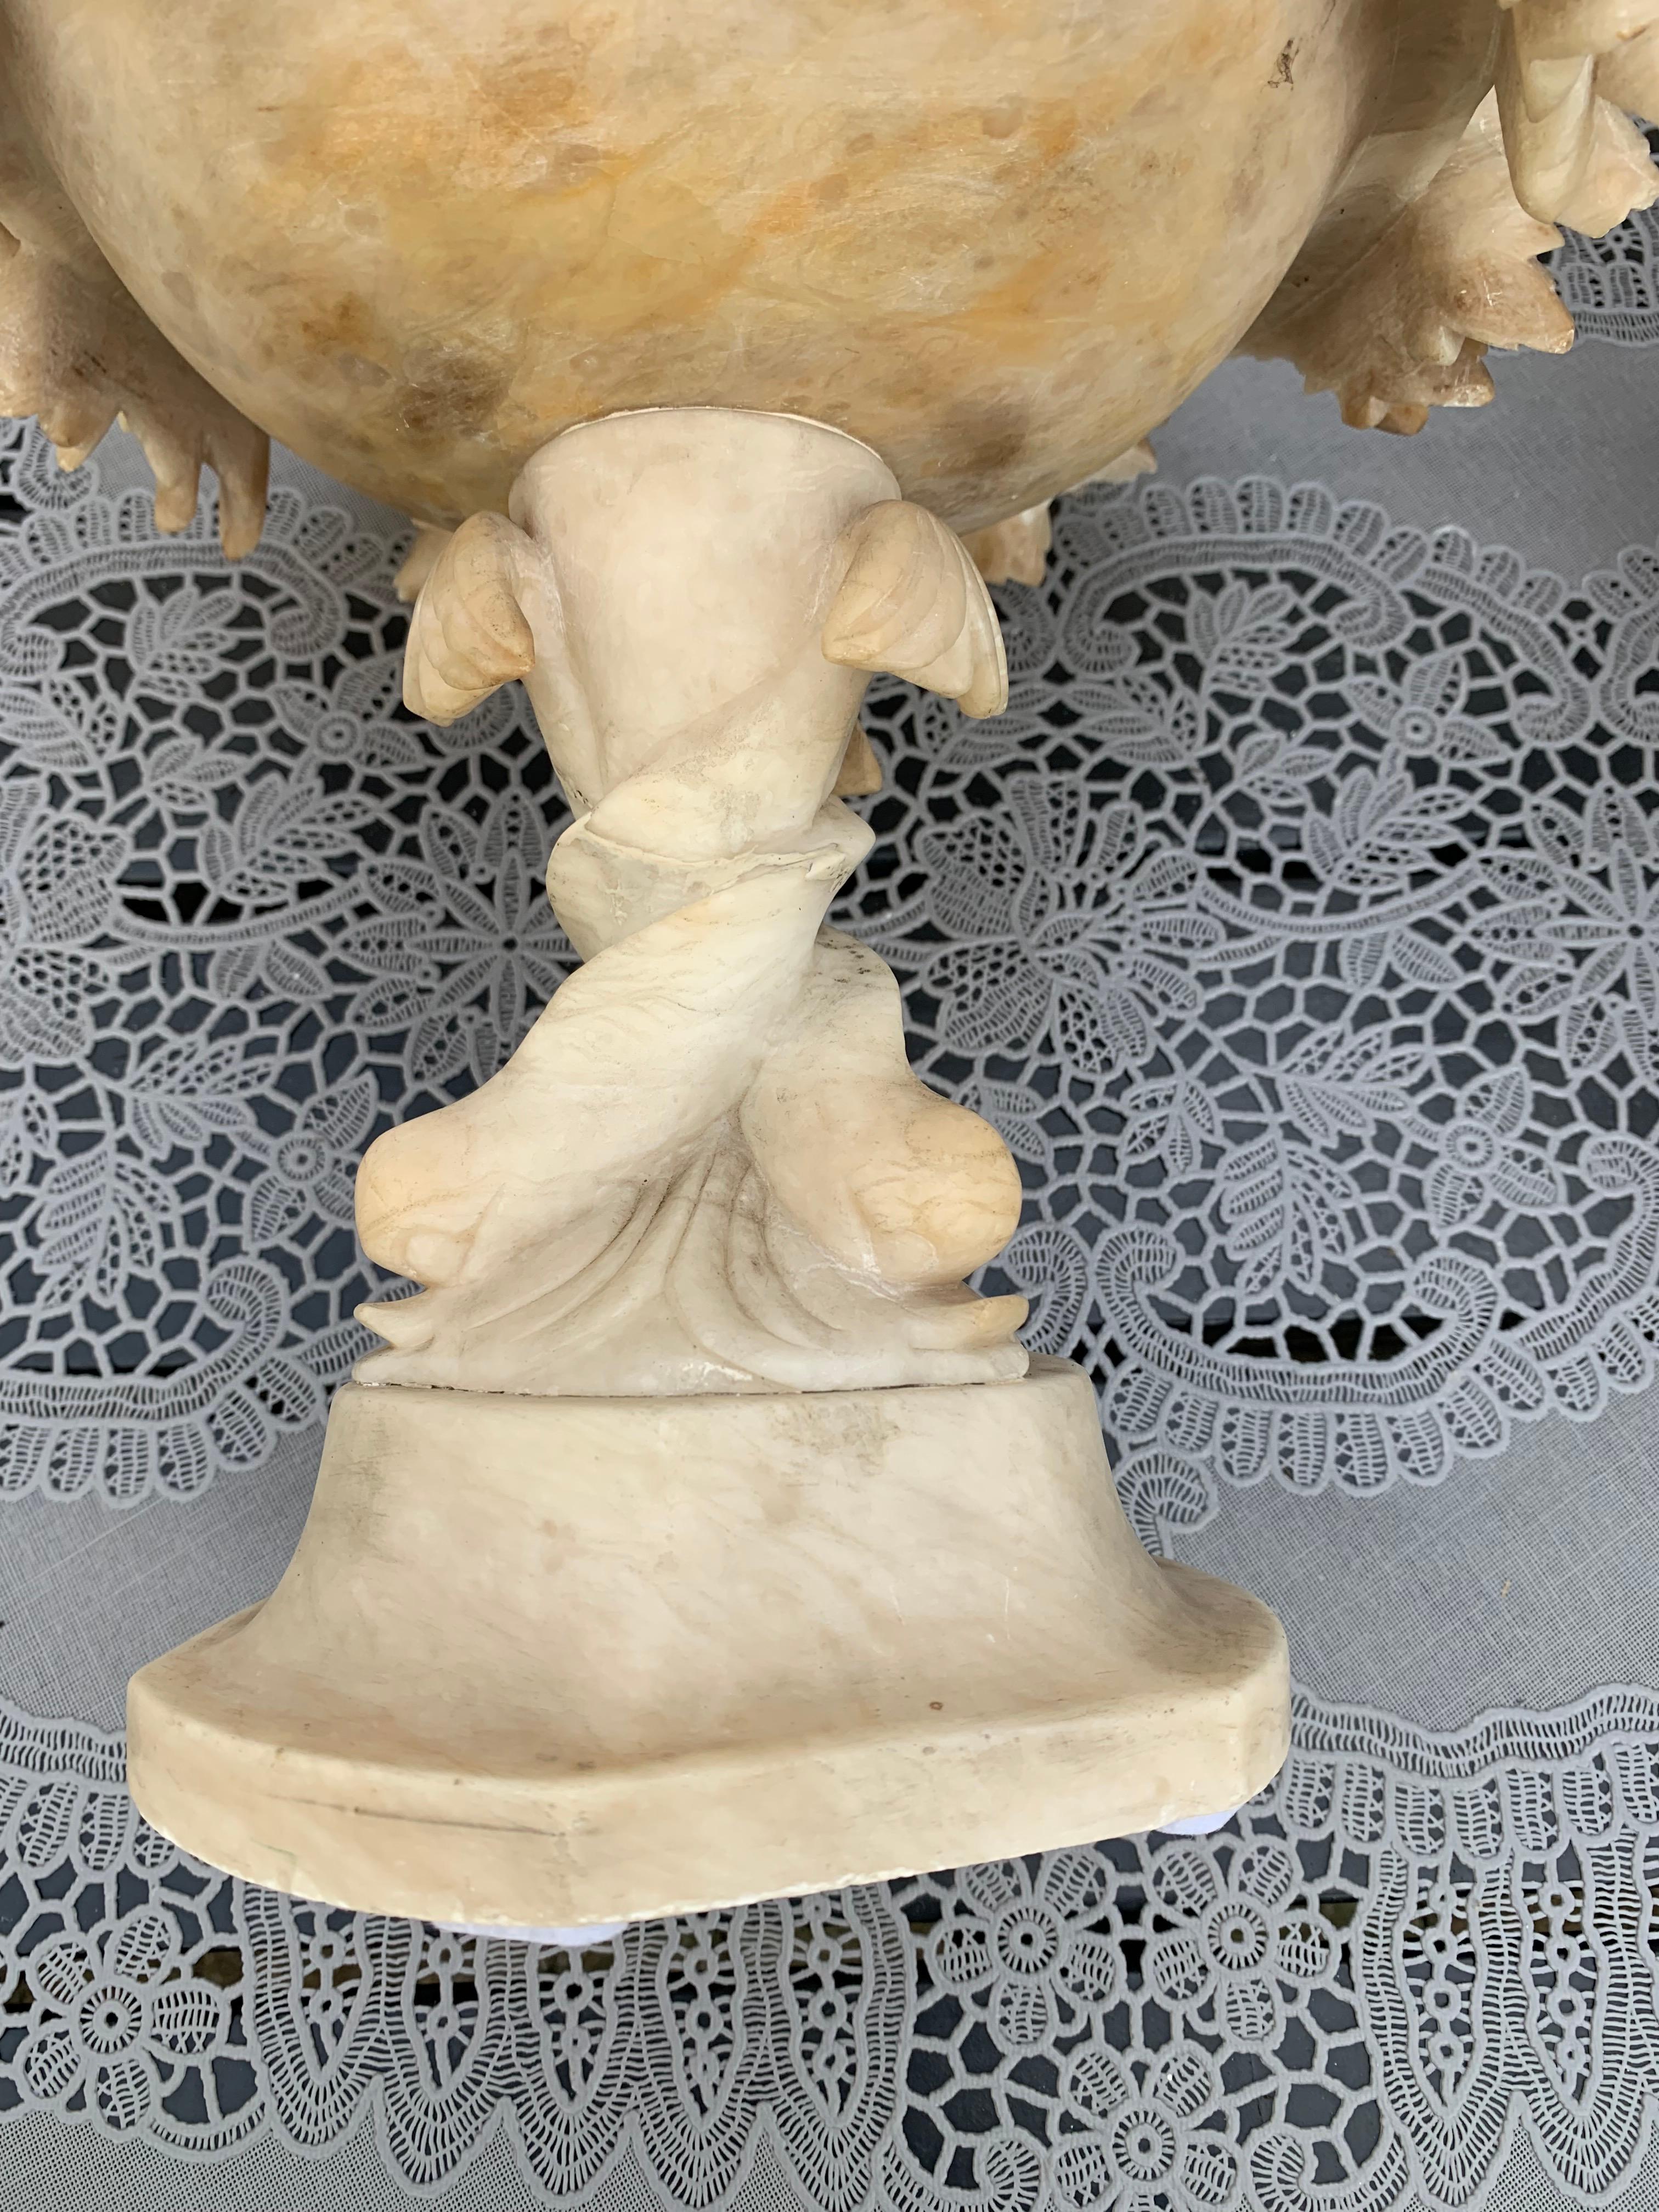 Antique & Rare Pair of Hand Carved Italian Alabaster Tazza Table Display Pieces 14